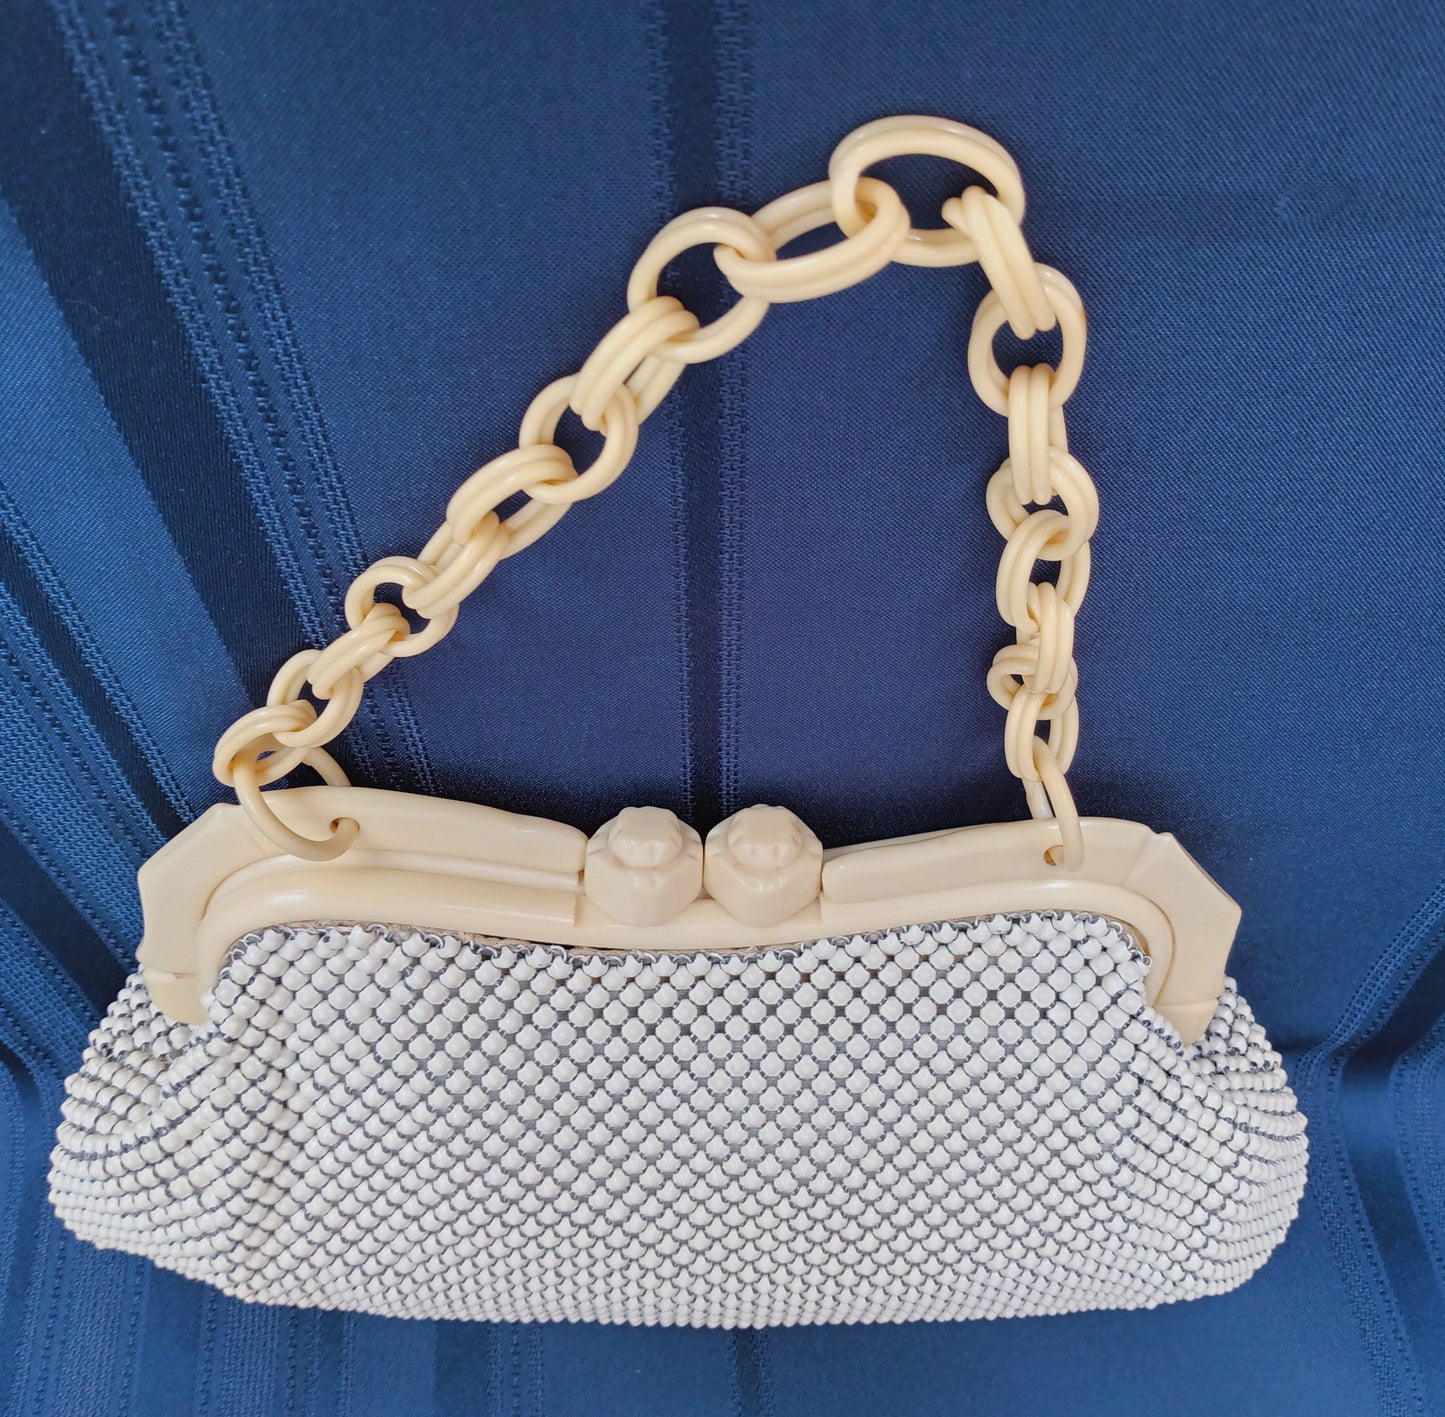 Vintage Whiting & Davis Co. Alumesh Ivory Celluloid Bag Purse Chain Link Strap/Handle Women Accessory - Made in USA